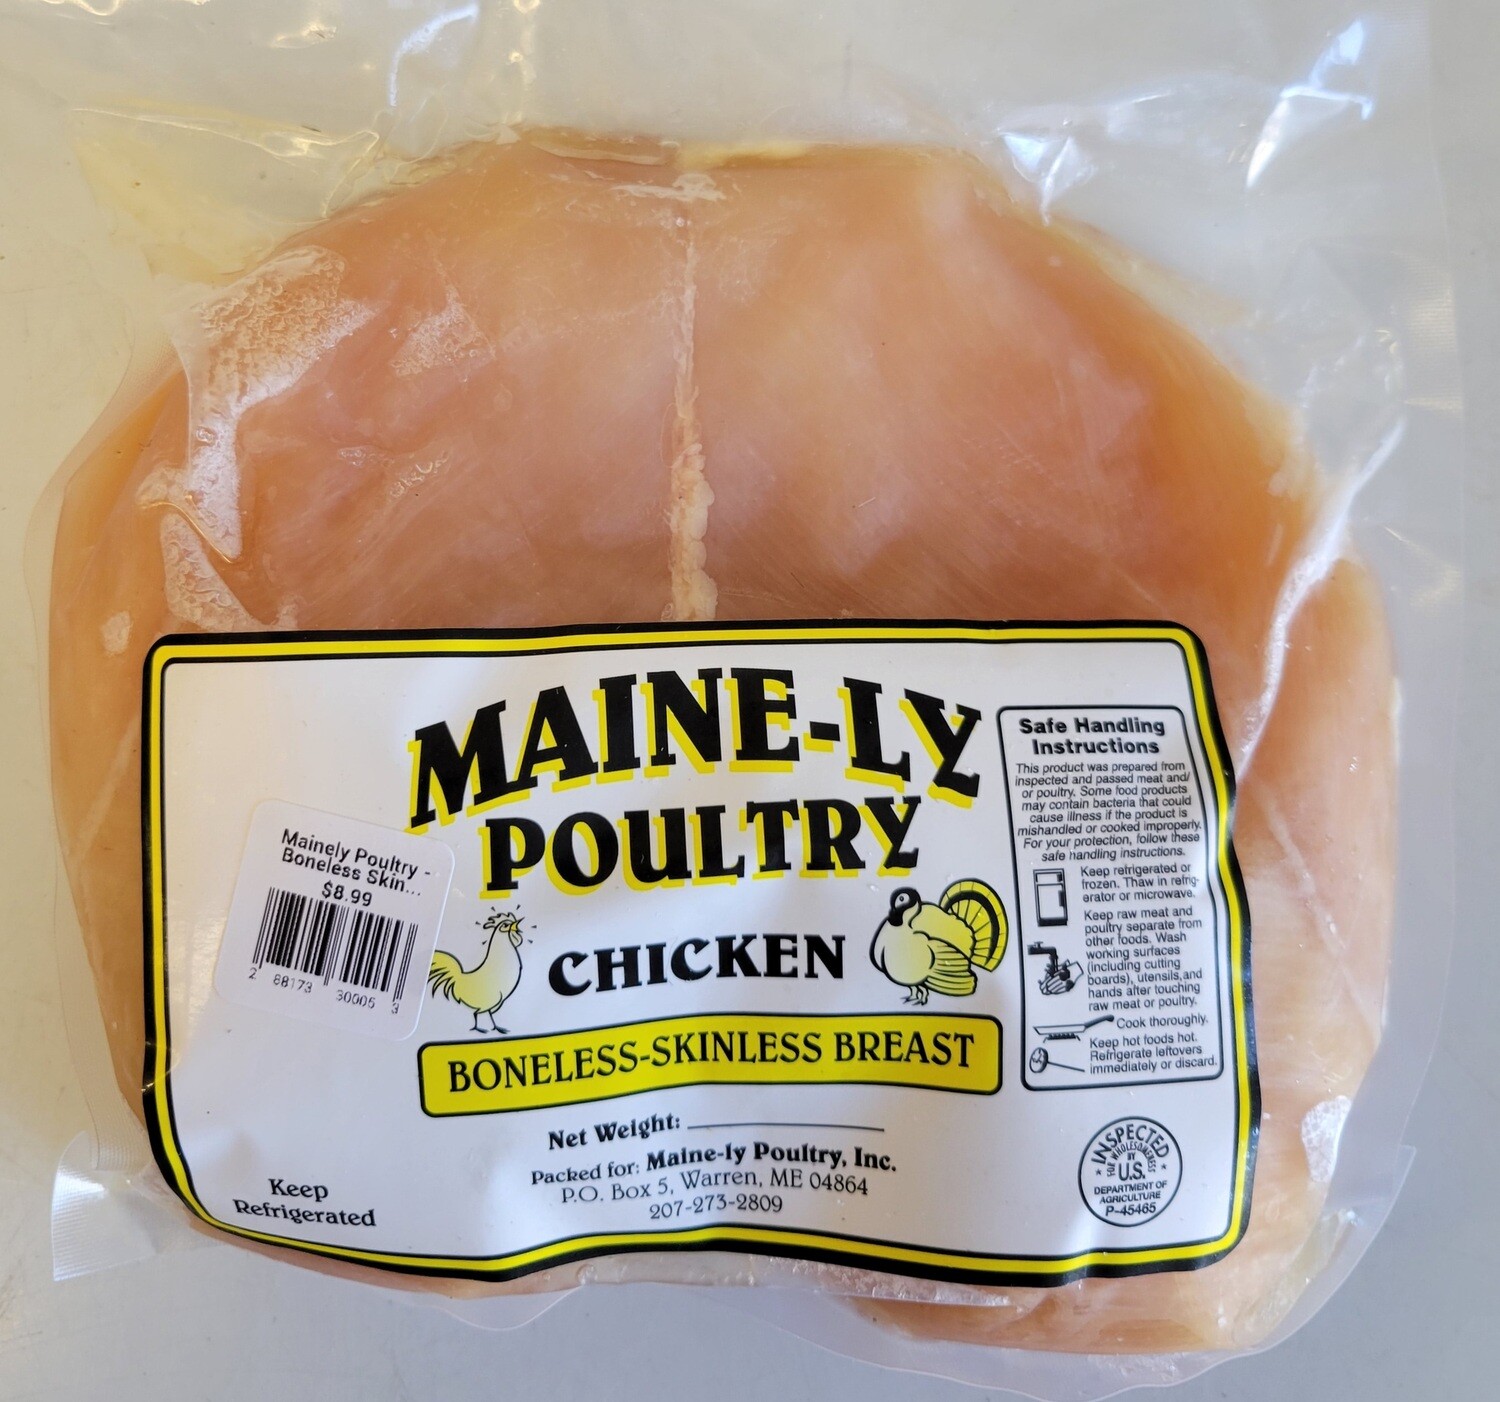 Maine-ly Poultry Chicken Cuts